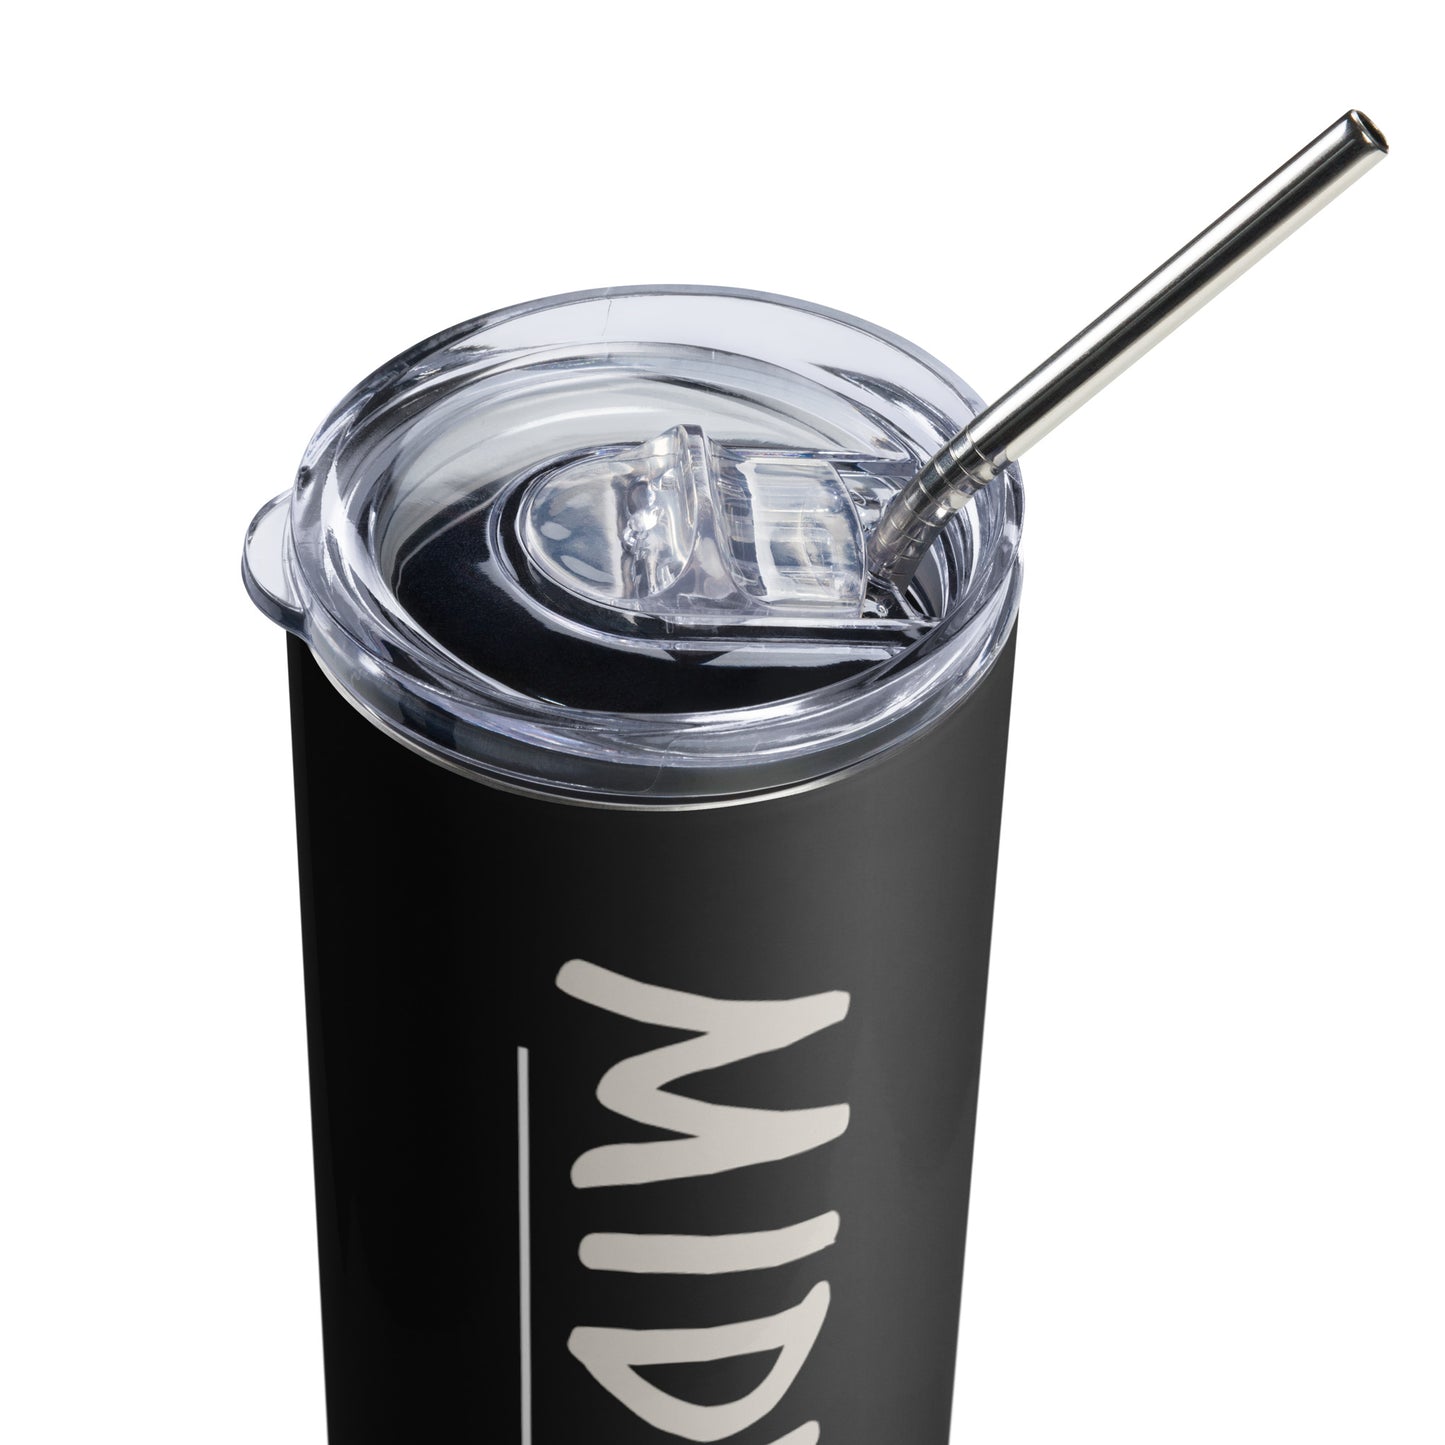 Midwest Detroit Michigan Love This! Stainless steel tumbler